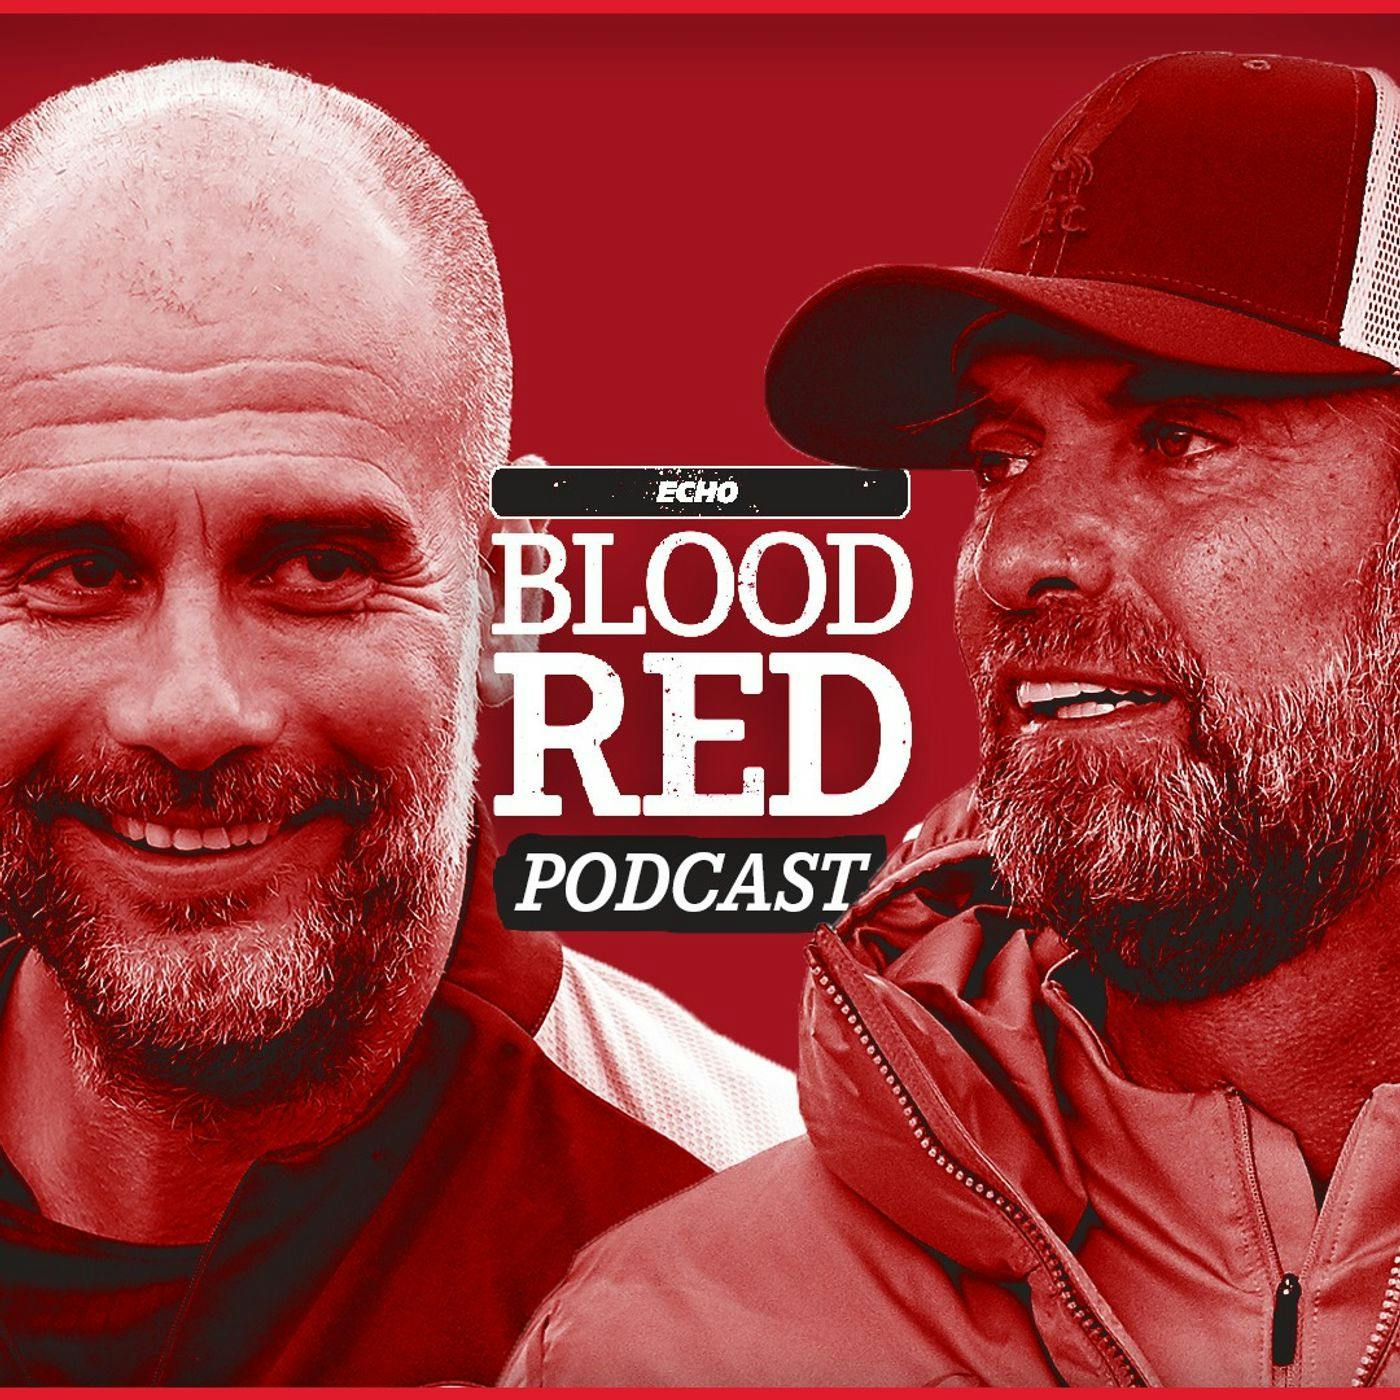 Blood Red: The Liverpool v Manchester City preview